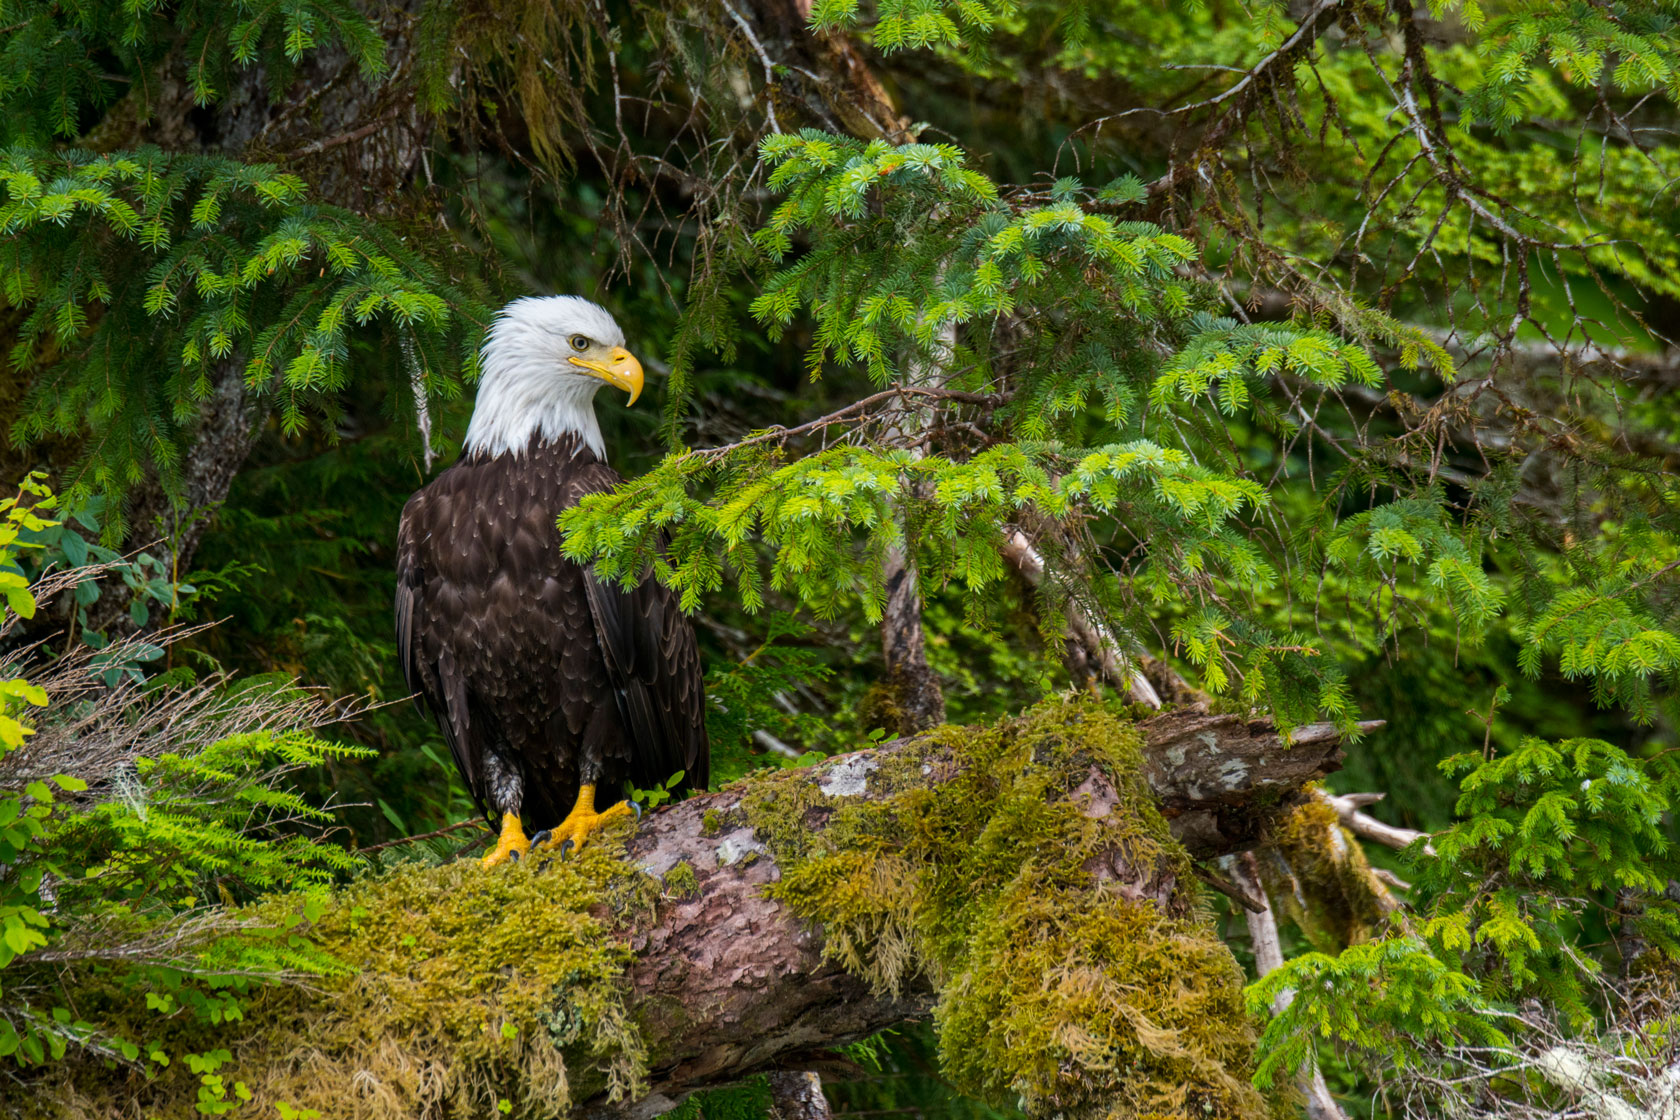 A bald eagle sits on a tree in Alaska's Tongass National Forest.